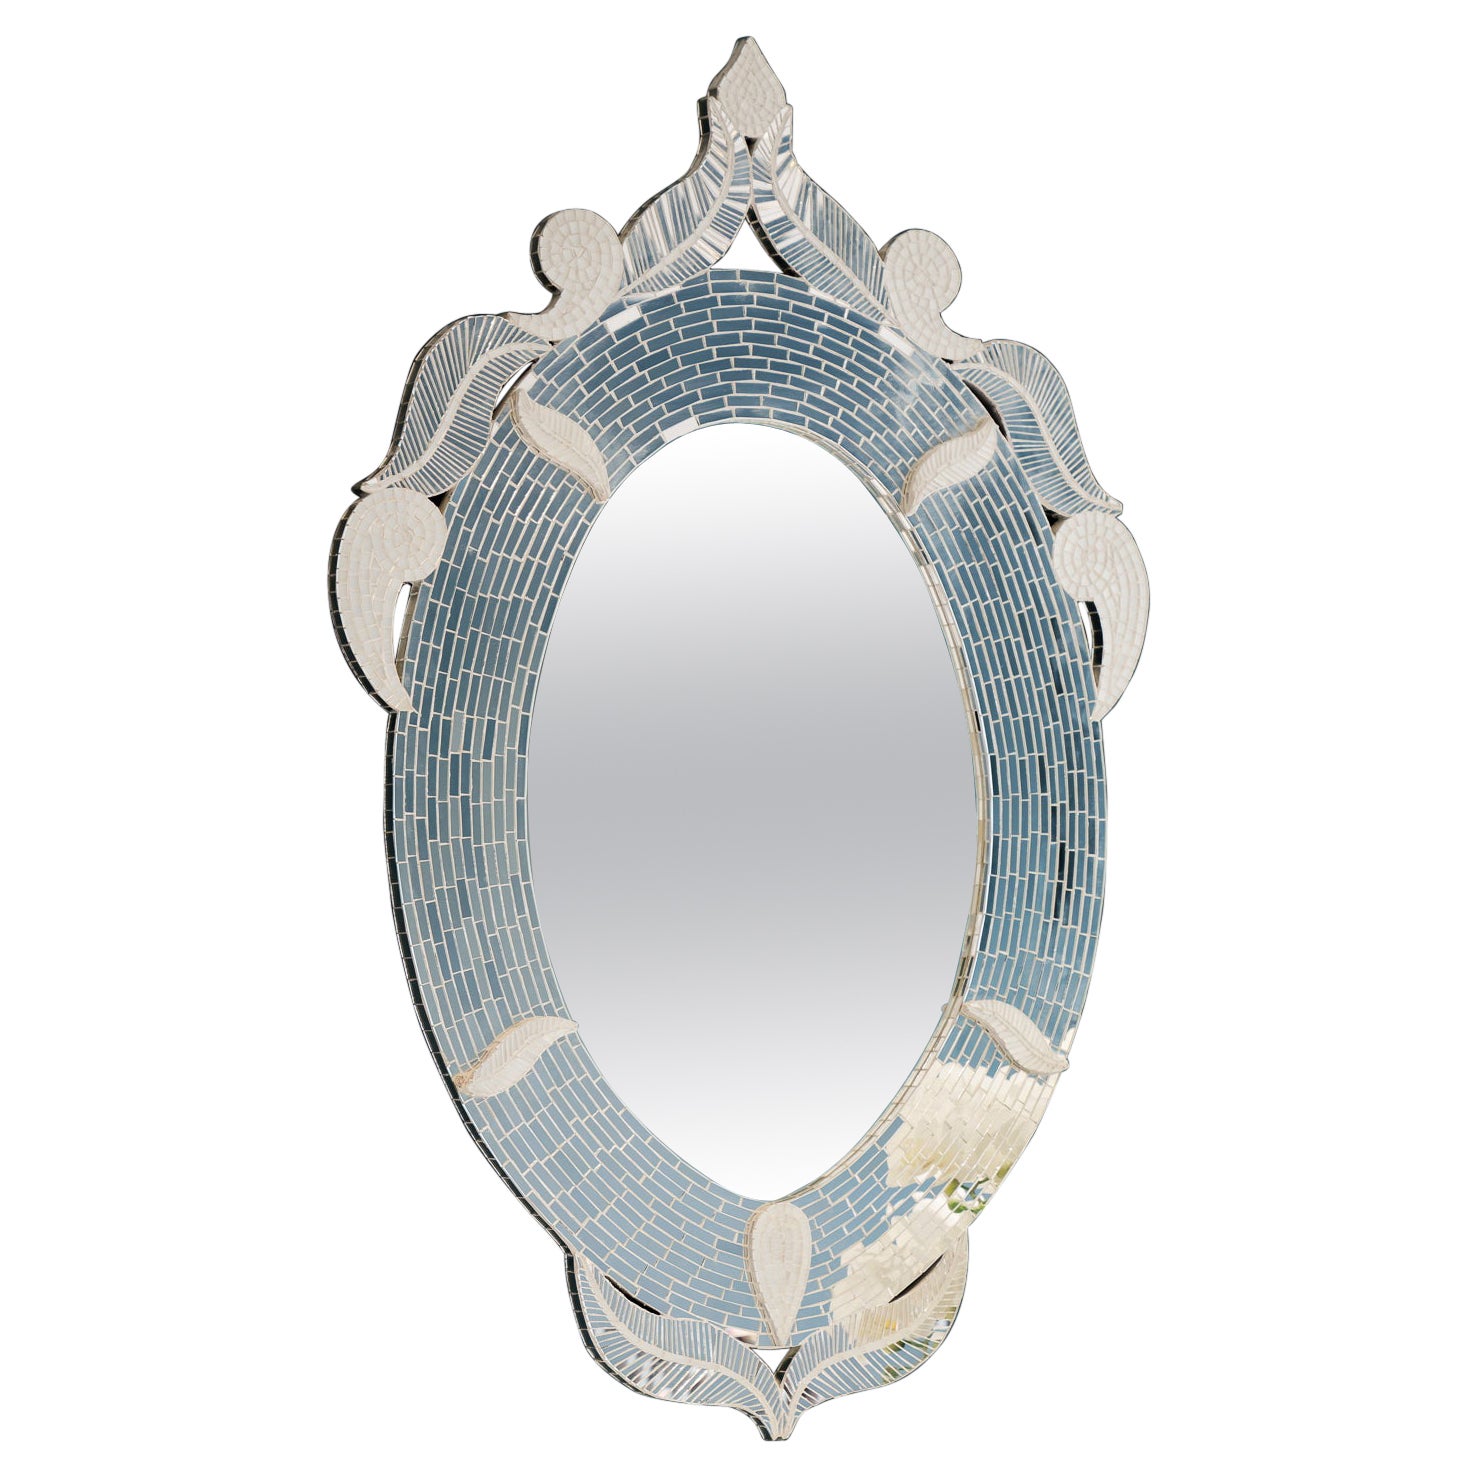 Palazzo Oval Mosaic Mirror, Handmade in the UK by Claire Nayman